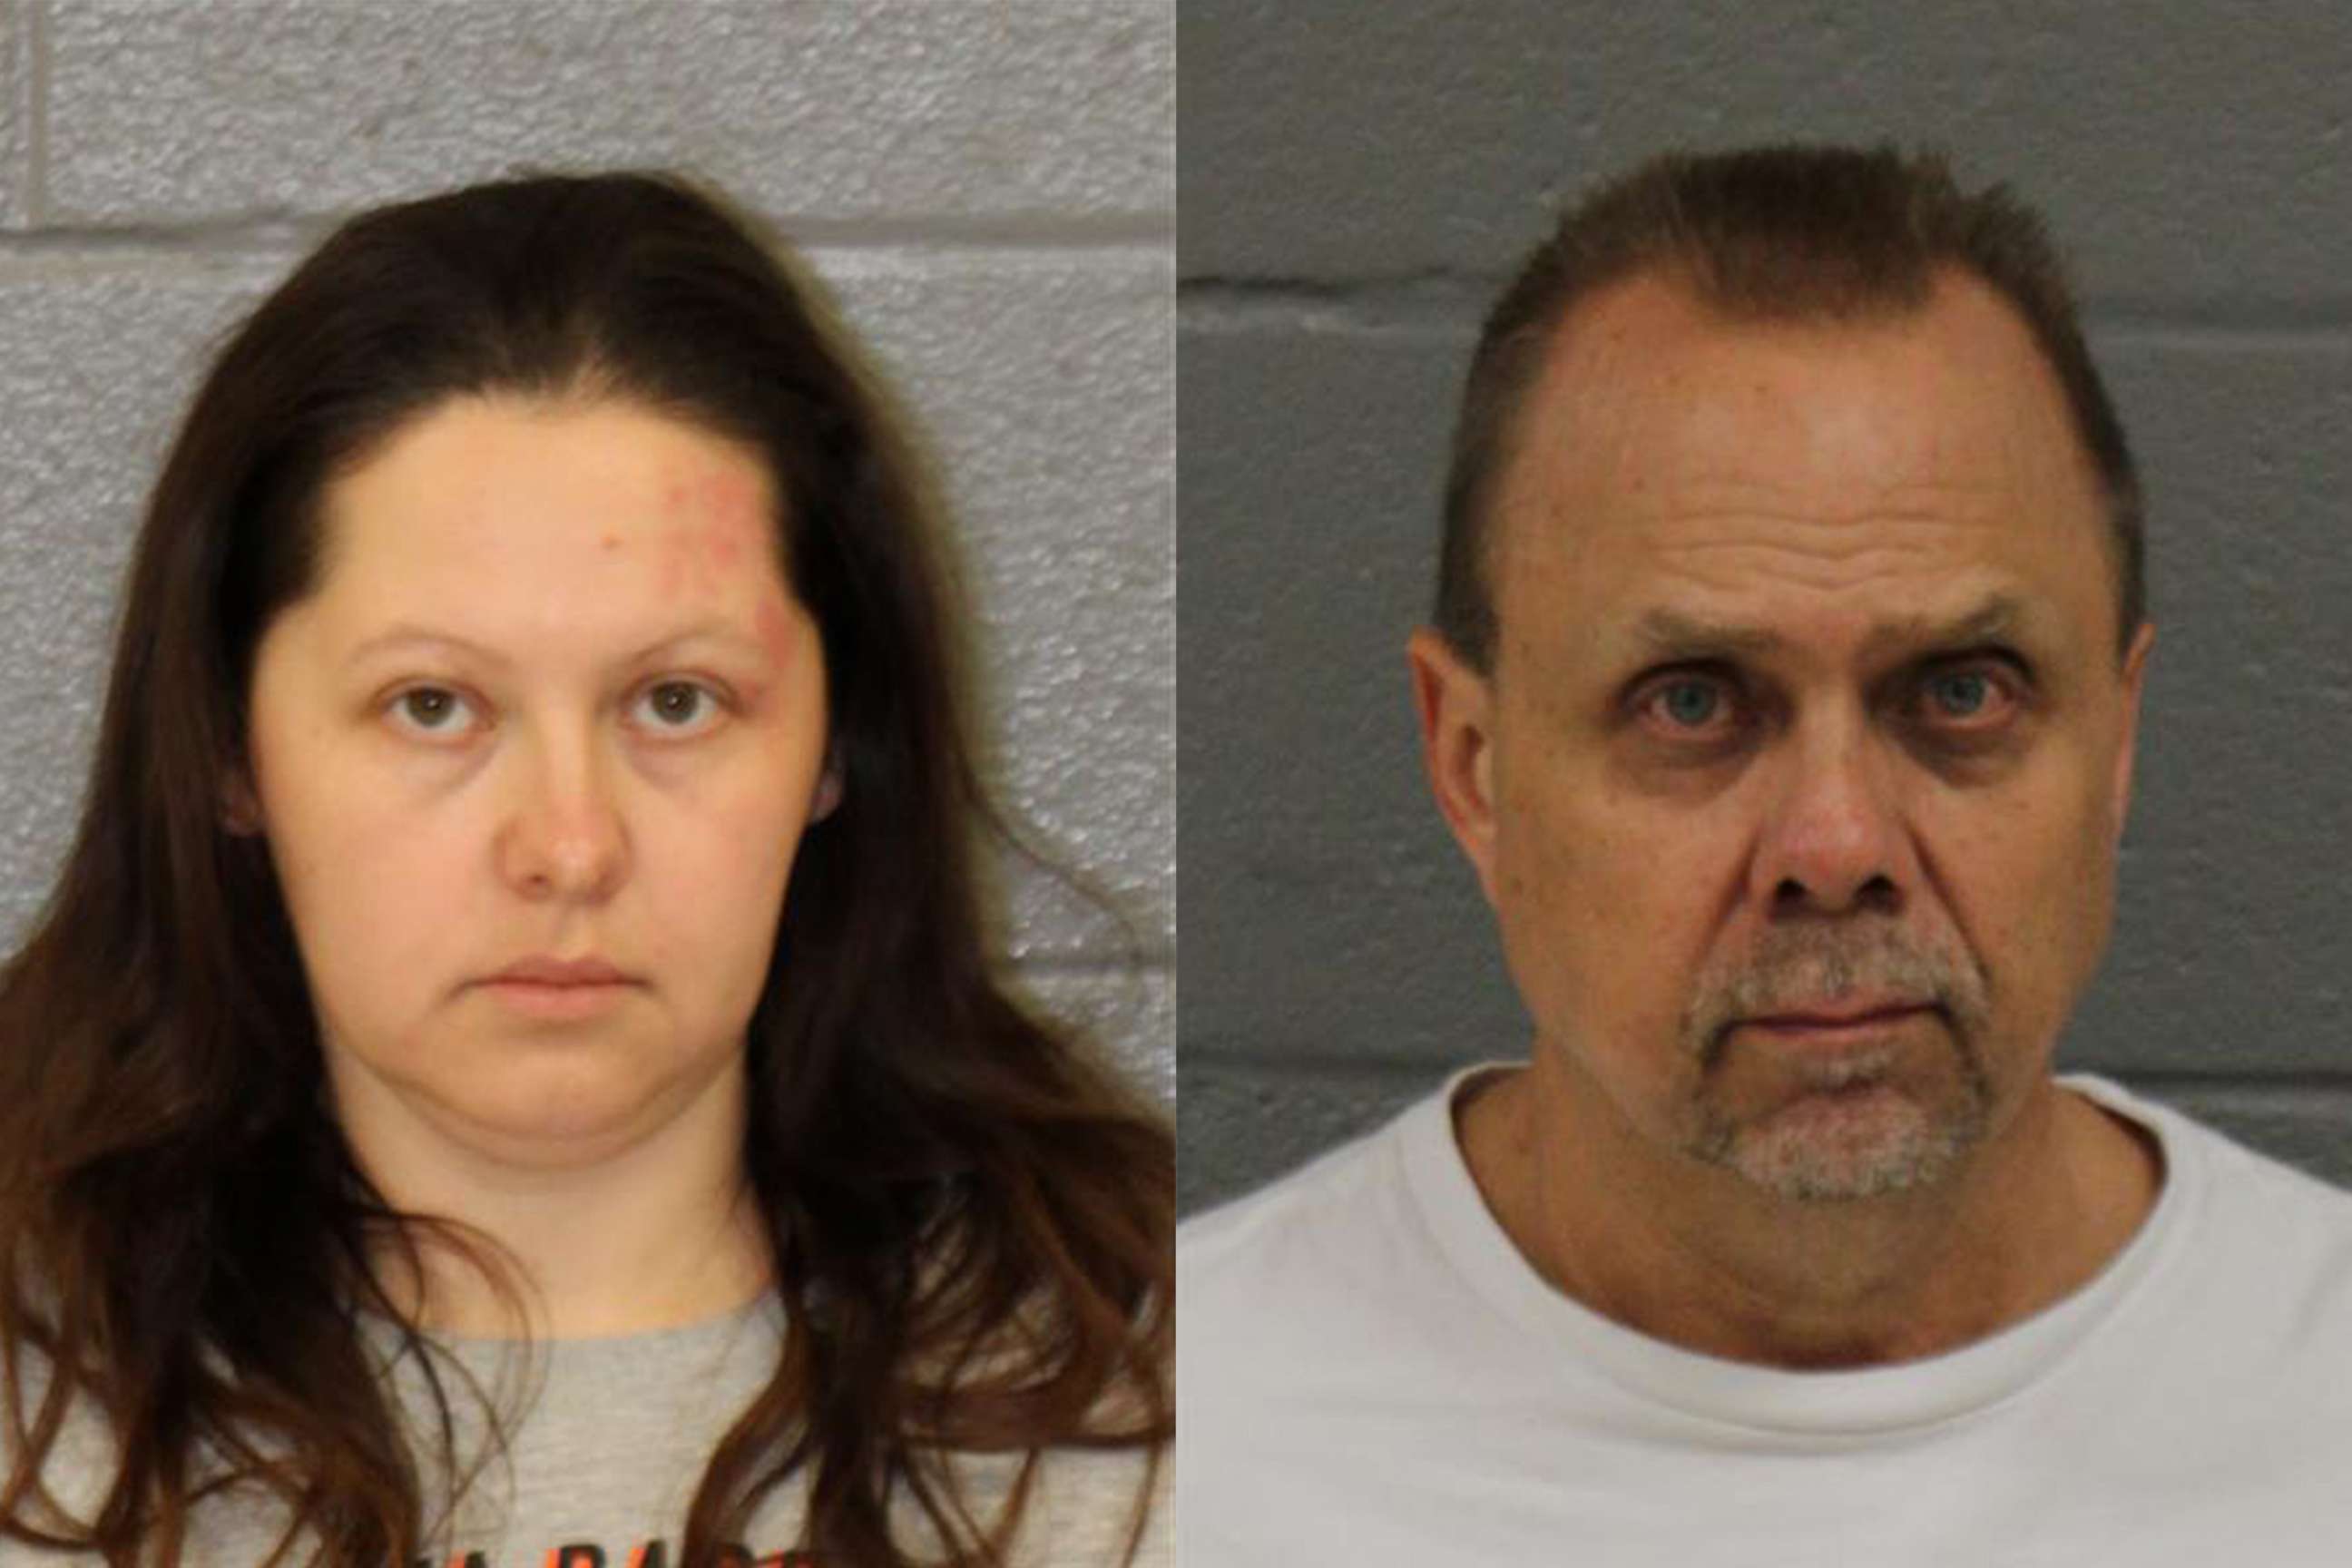 PHOTO: Diana Cojocari, 37, and Christopher Palmiter, 60, are seen in undated photos released by the Mecklenburg County Sheriff's Office in North Carolina.